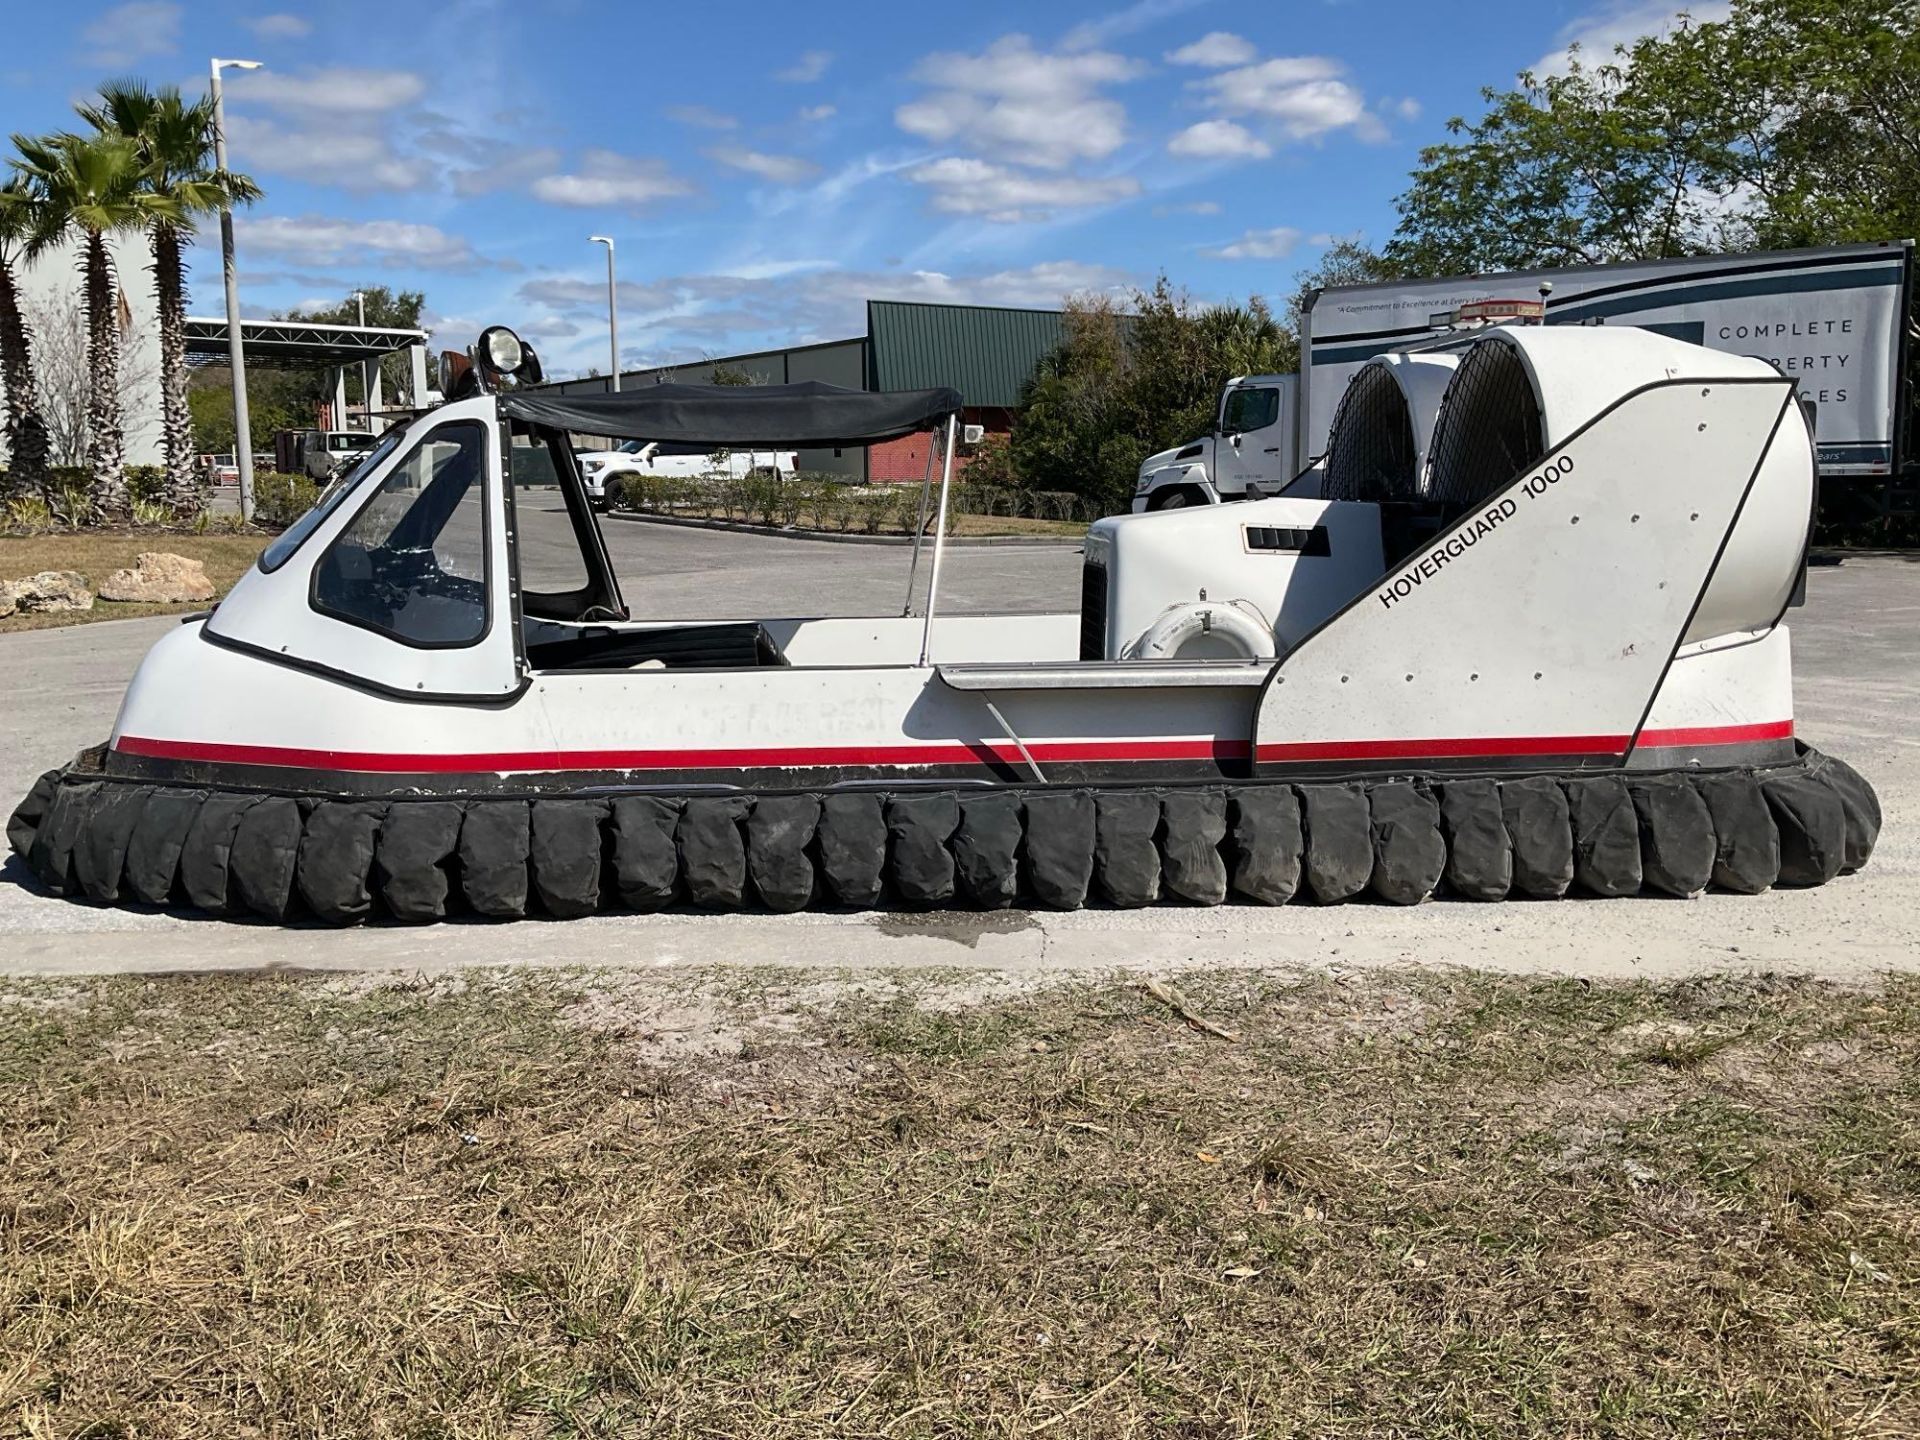 HOVERGUARD HOVERCRAFT W/TRAILER, HOVERTOUR 1000 MODEL 7900200, NEW BATTERY , 37 HRS SHOWING - Image 4 of 39